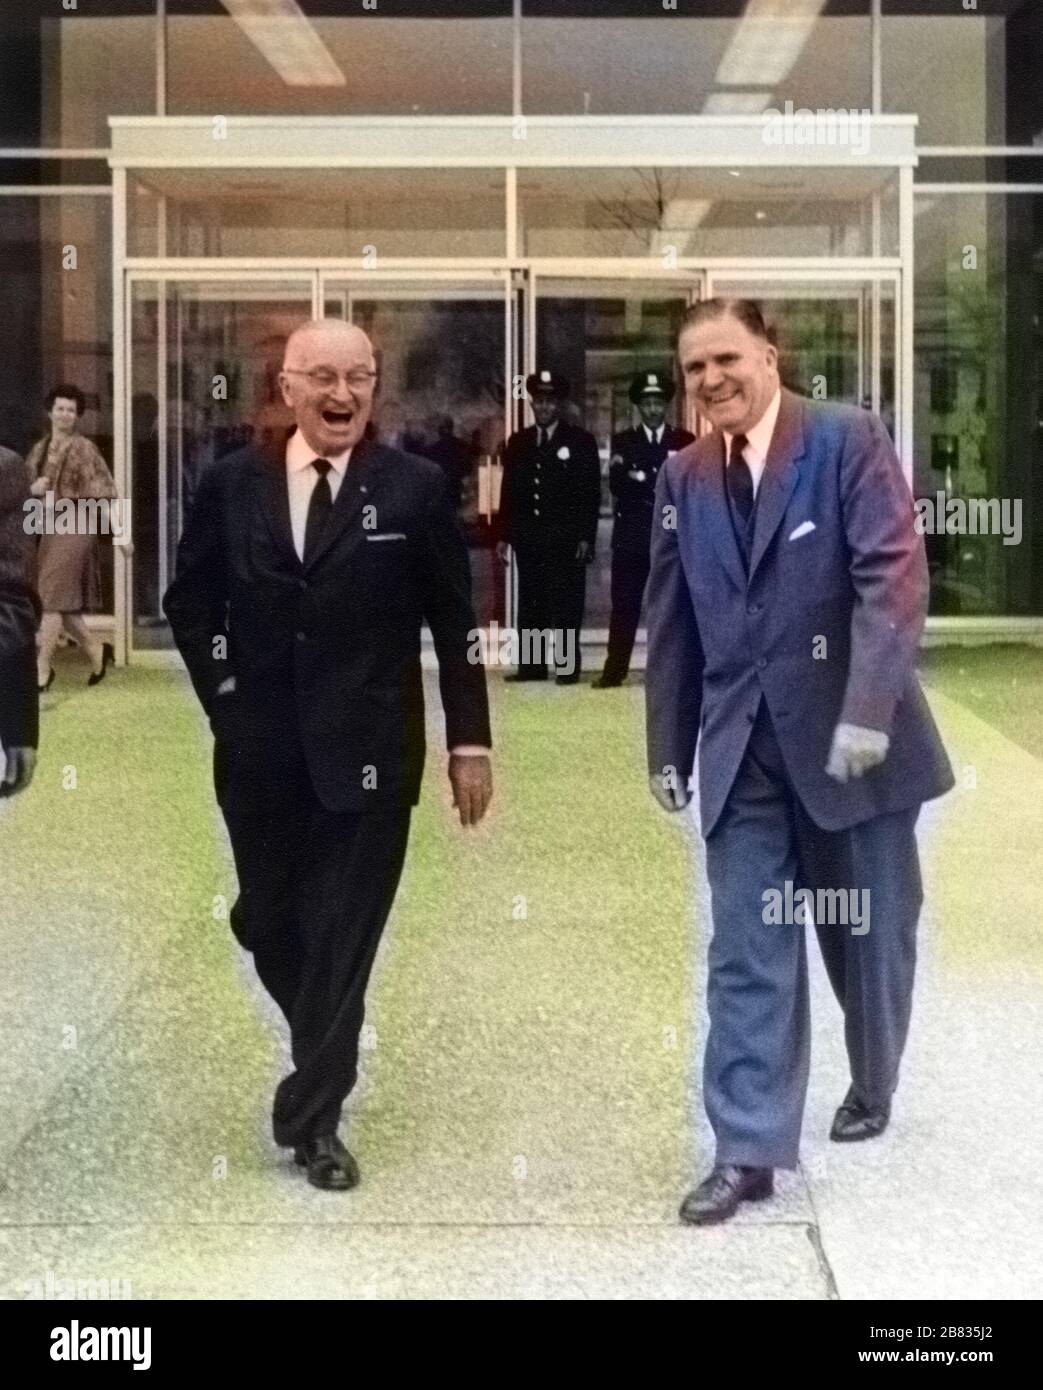 President Harry S. Truman and NASA Administrator James E. Webb in a visit to newly opened NASA Headquarters in Washington, District of Columbia, November 3, 1961. Image courtesy National Aeronautics and Space Administration (NASA). Note: Image has been digitally colorized using a modern process. Colors may not be period-accurate. () Stock Photo